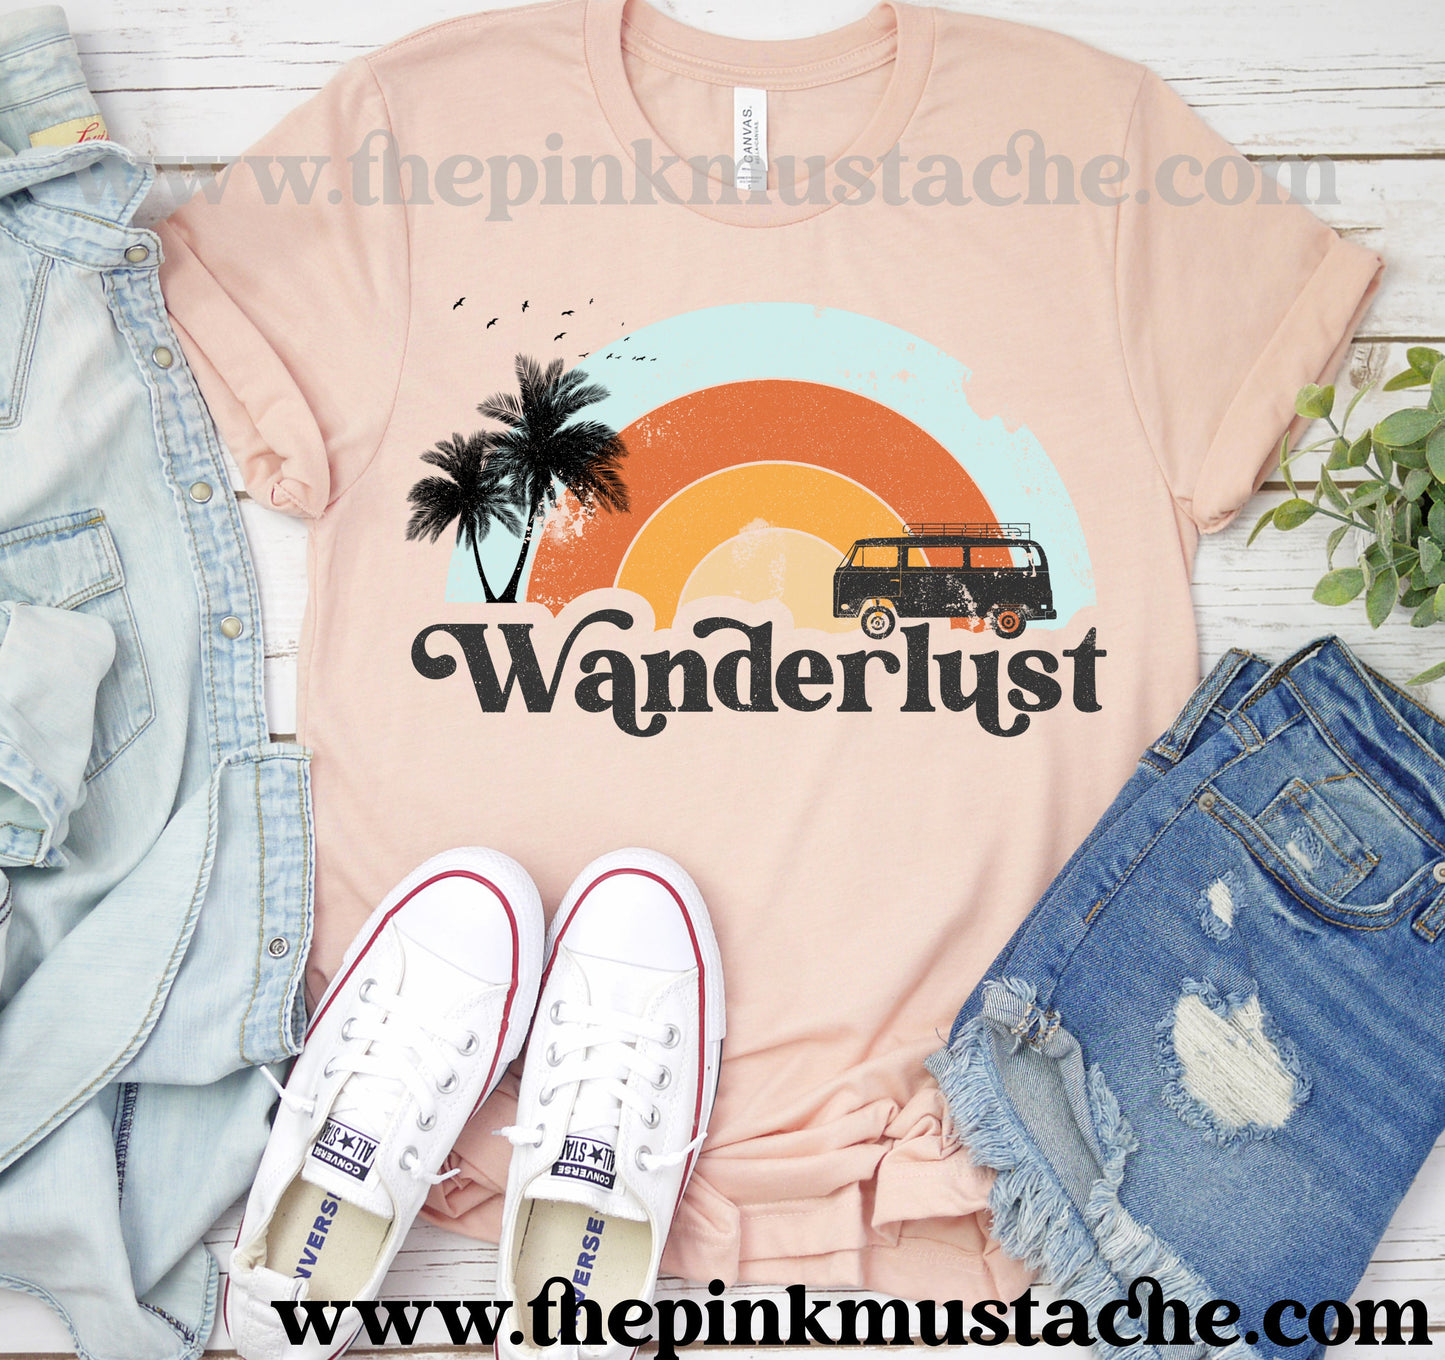 Wanderlust - Retro Vibes Softstyle Bella Tee / Fun Hippie Vibes Tee/ Youth and Adult Sizing Available